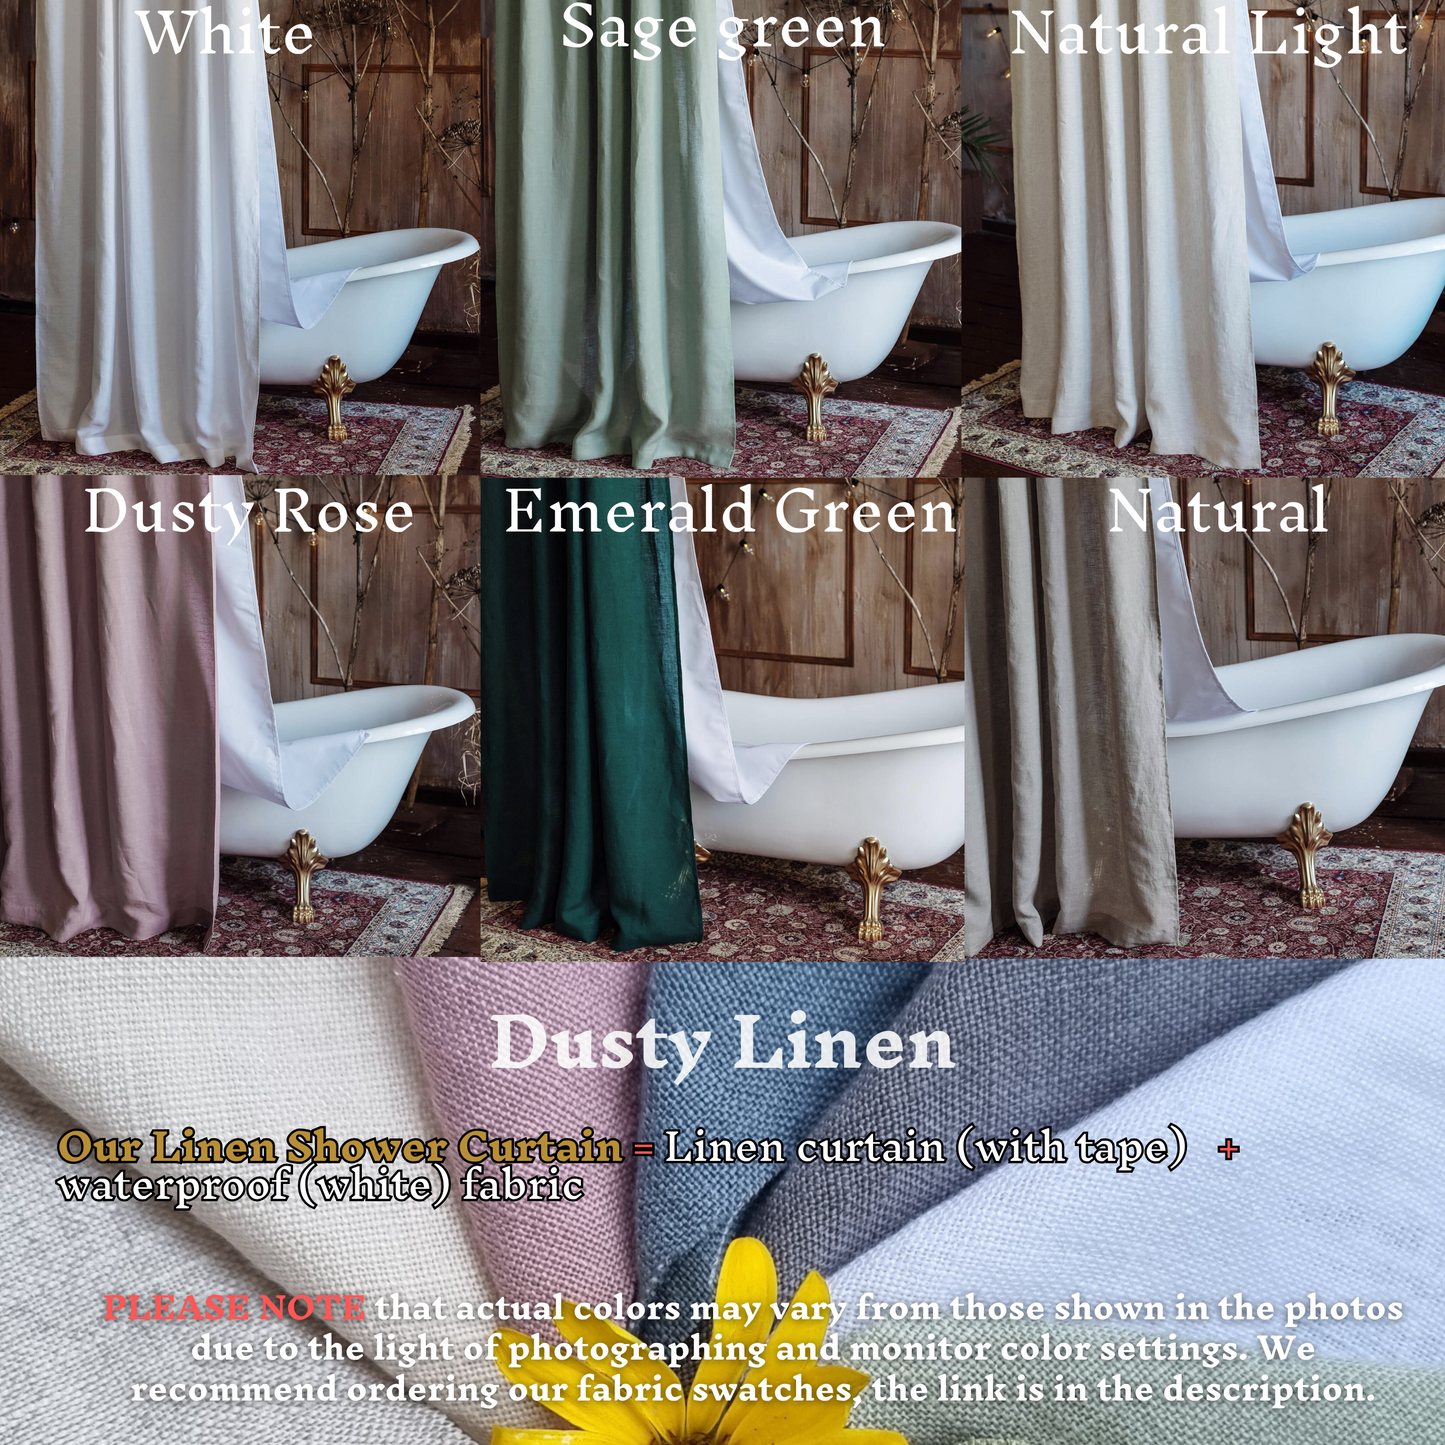 Linen Shower curtain in Natural Light color